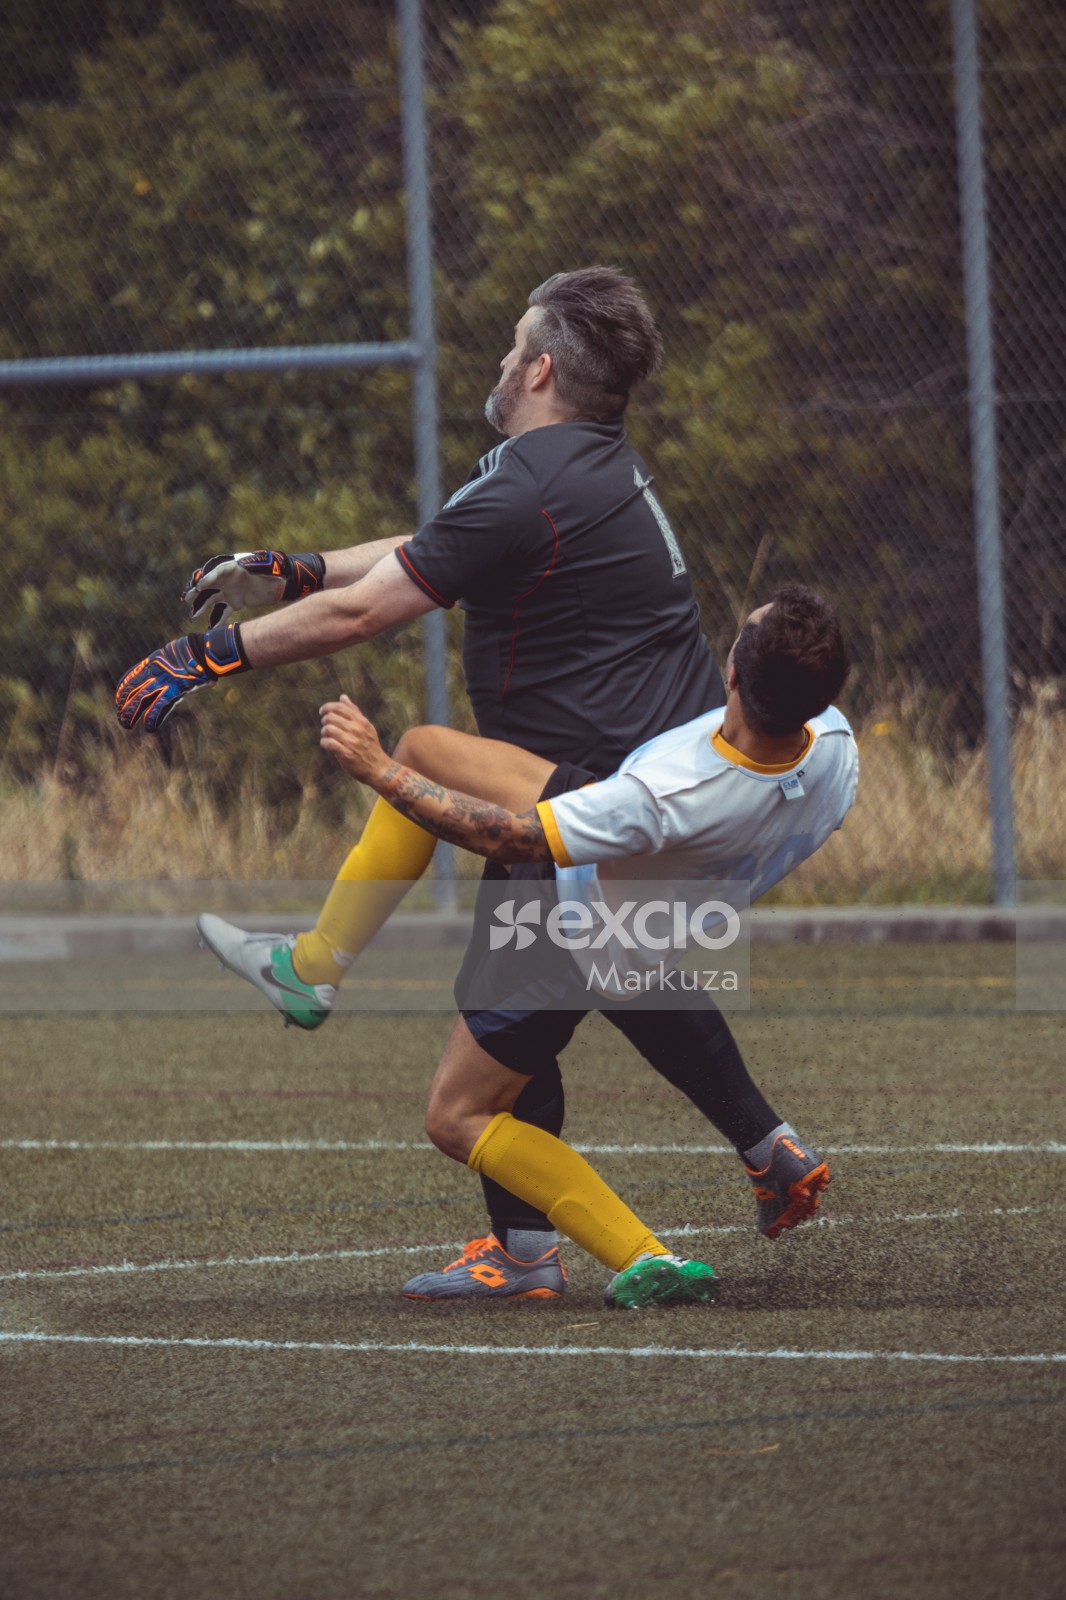 Player and goalkeeper battle to get the ball - Sports Zone sunday league